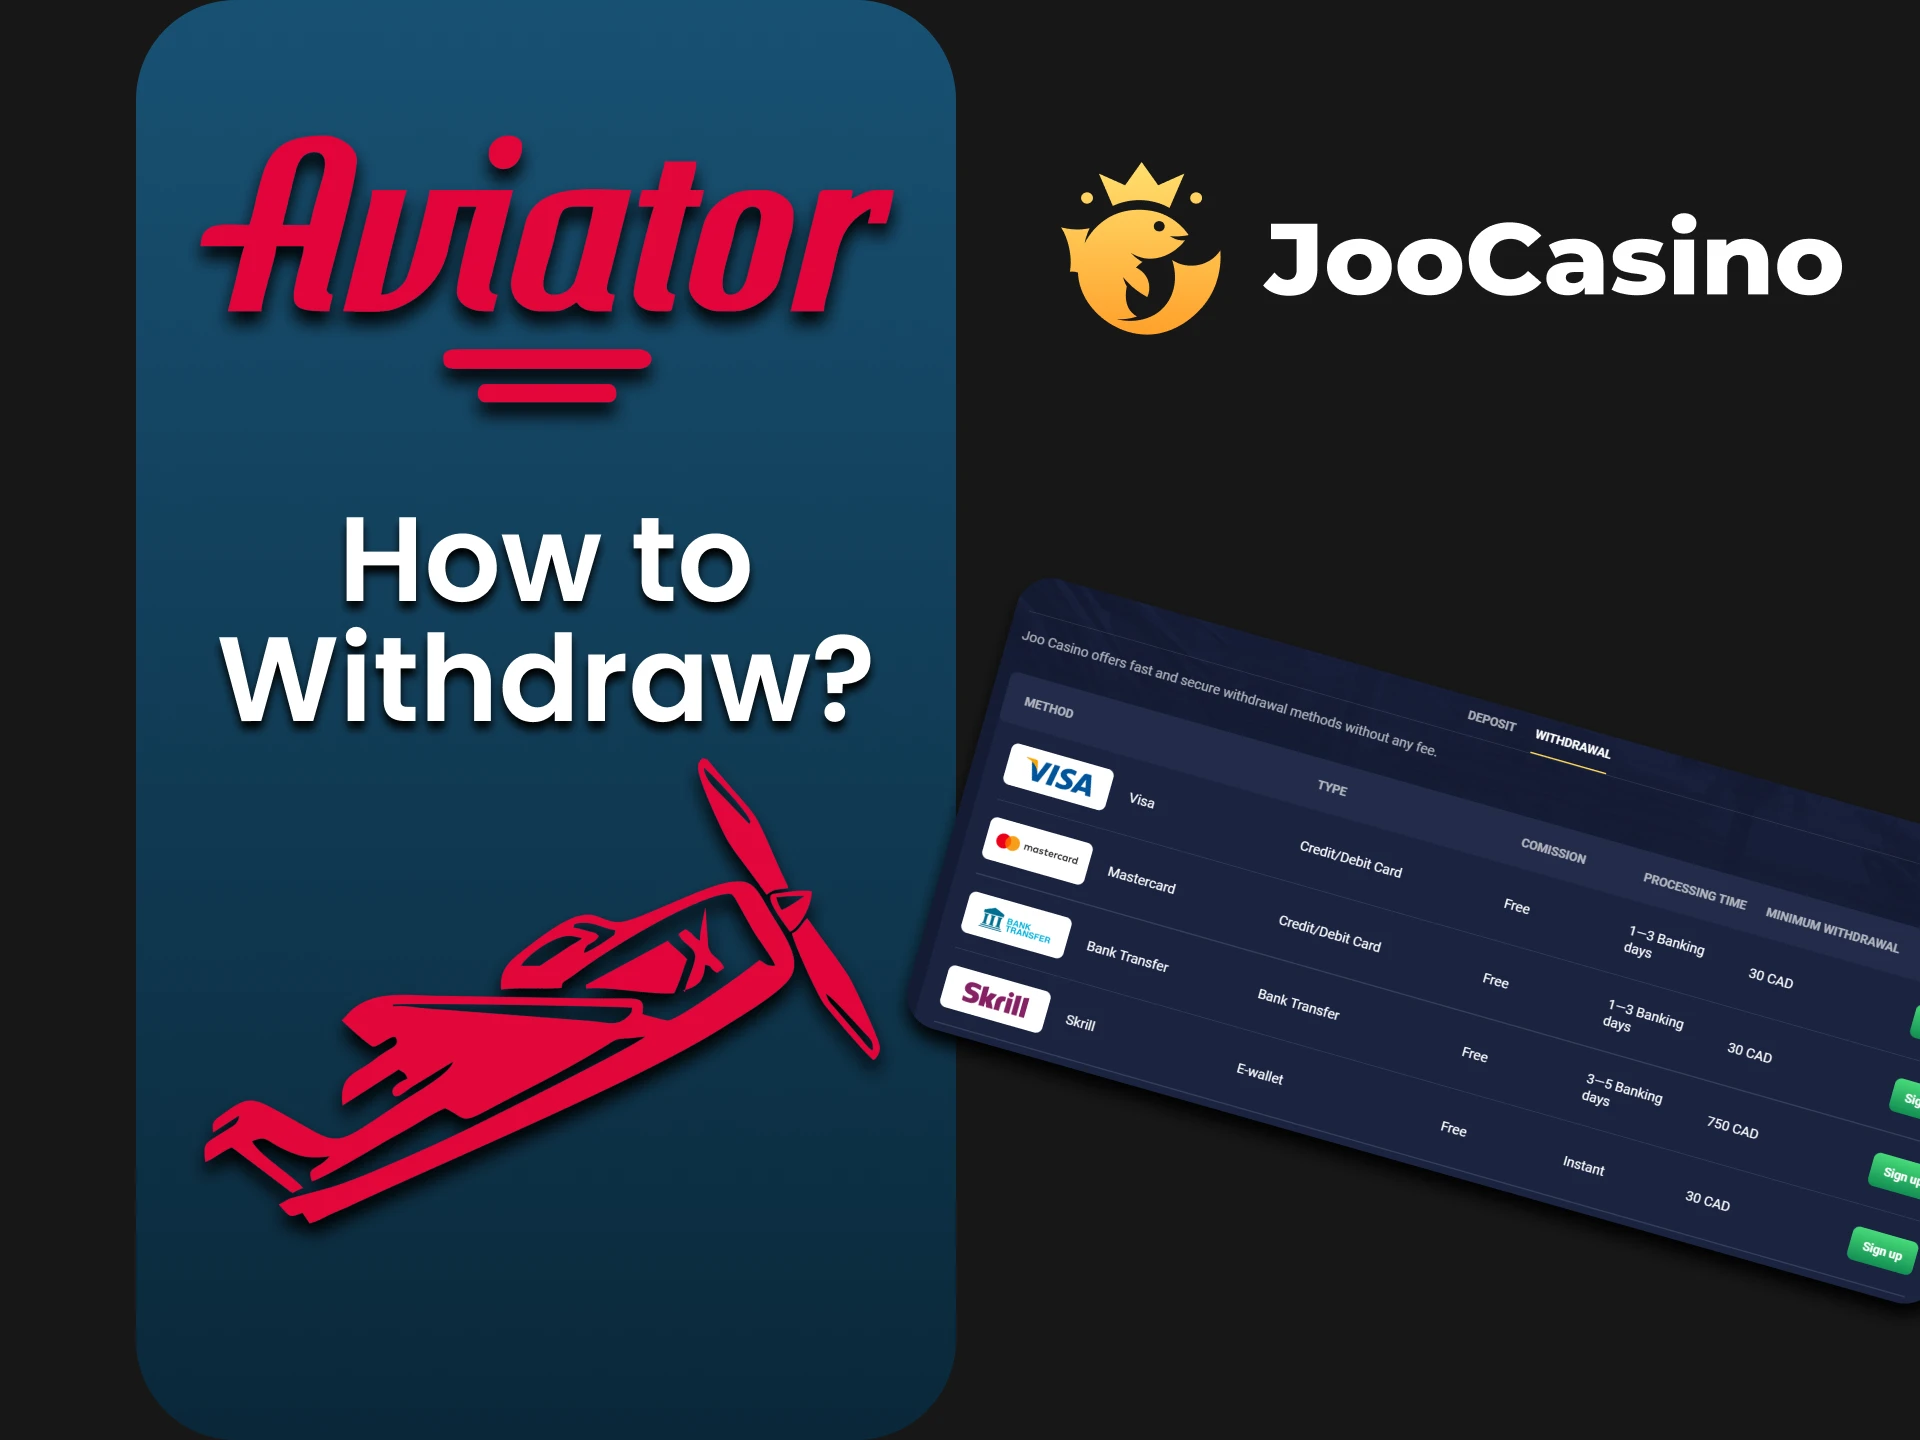 We will tell you how to withdraw funds for the game Aviator at Joo Casino.